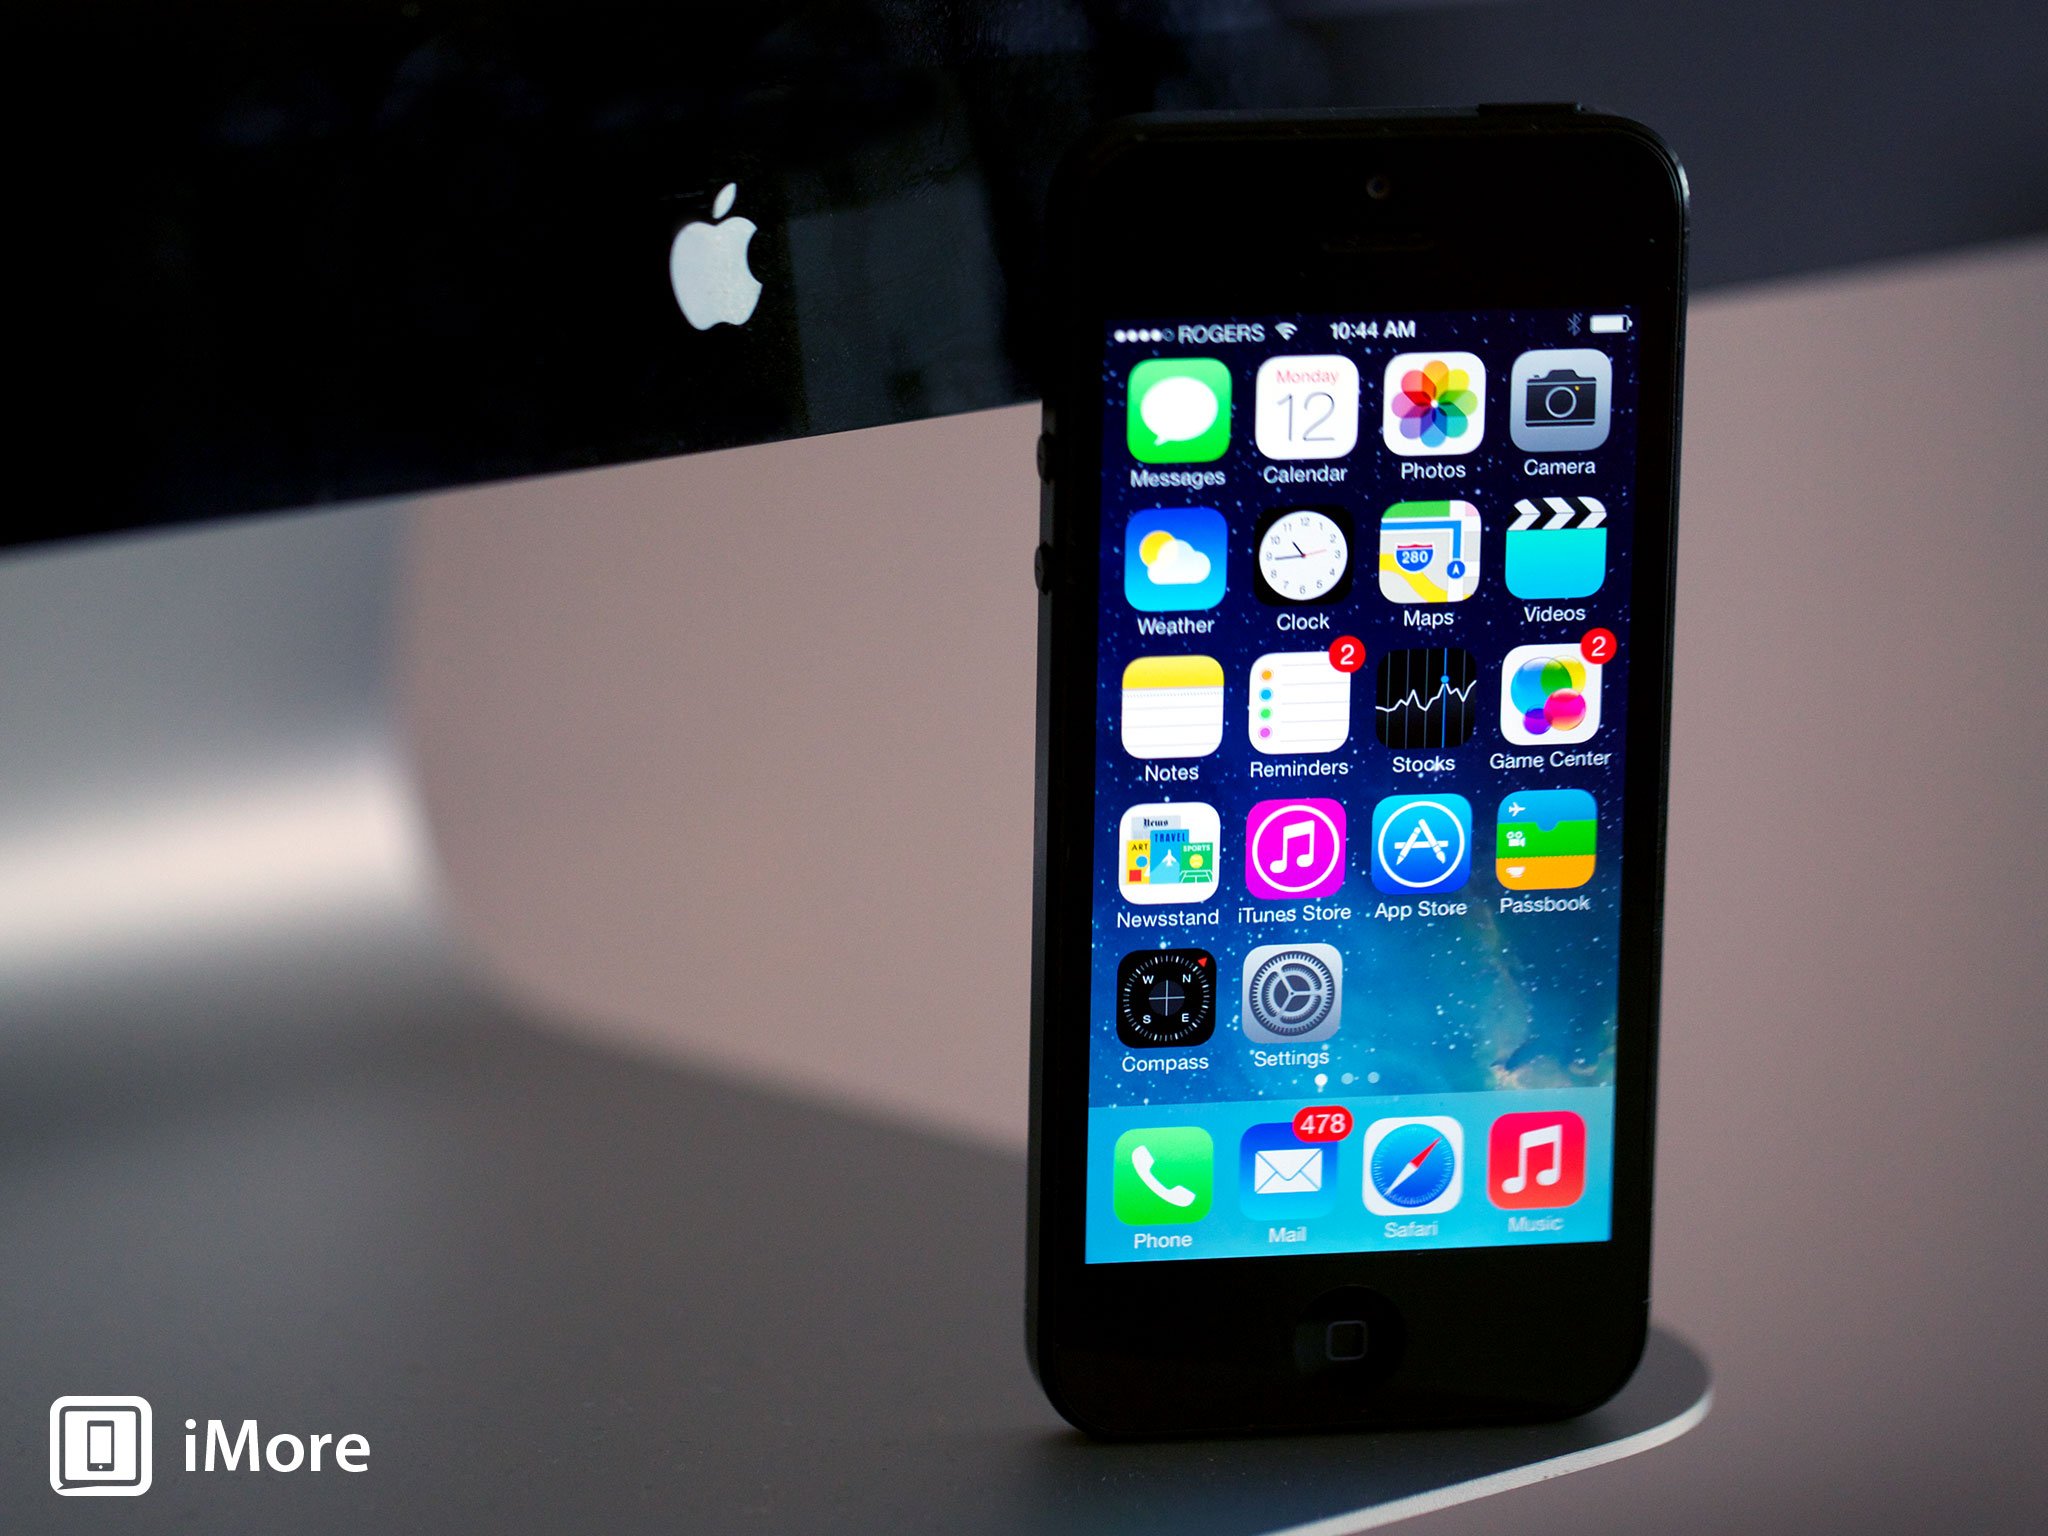 Countdown to iPhone 5s contest: Follow @iMore and retweet for your chance to win $500!